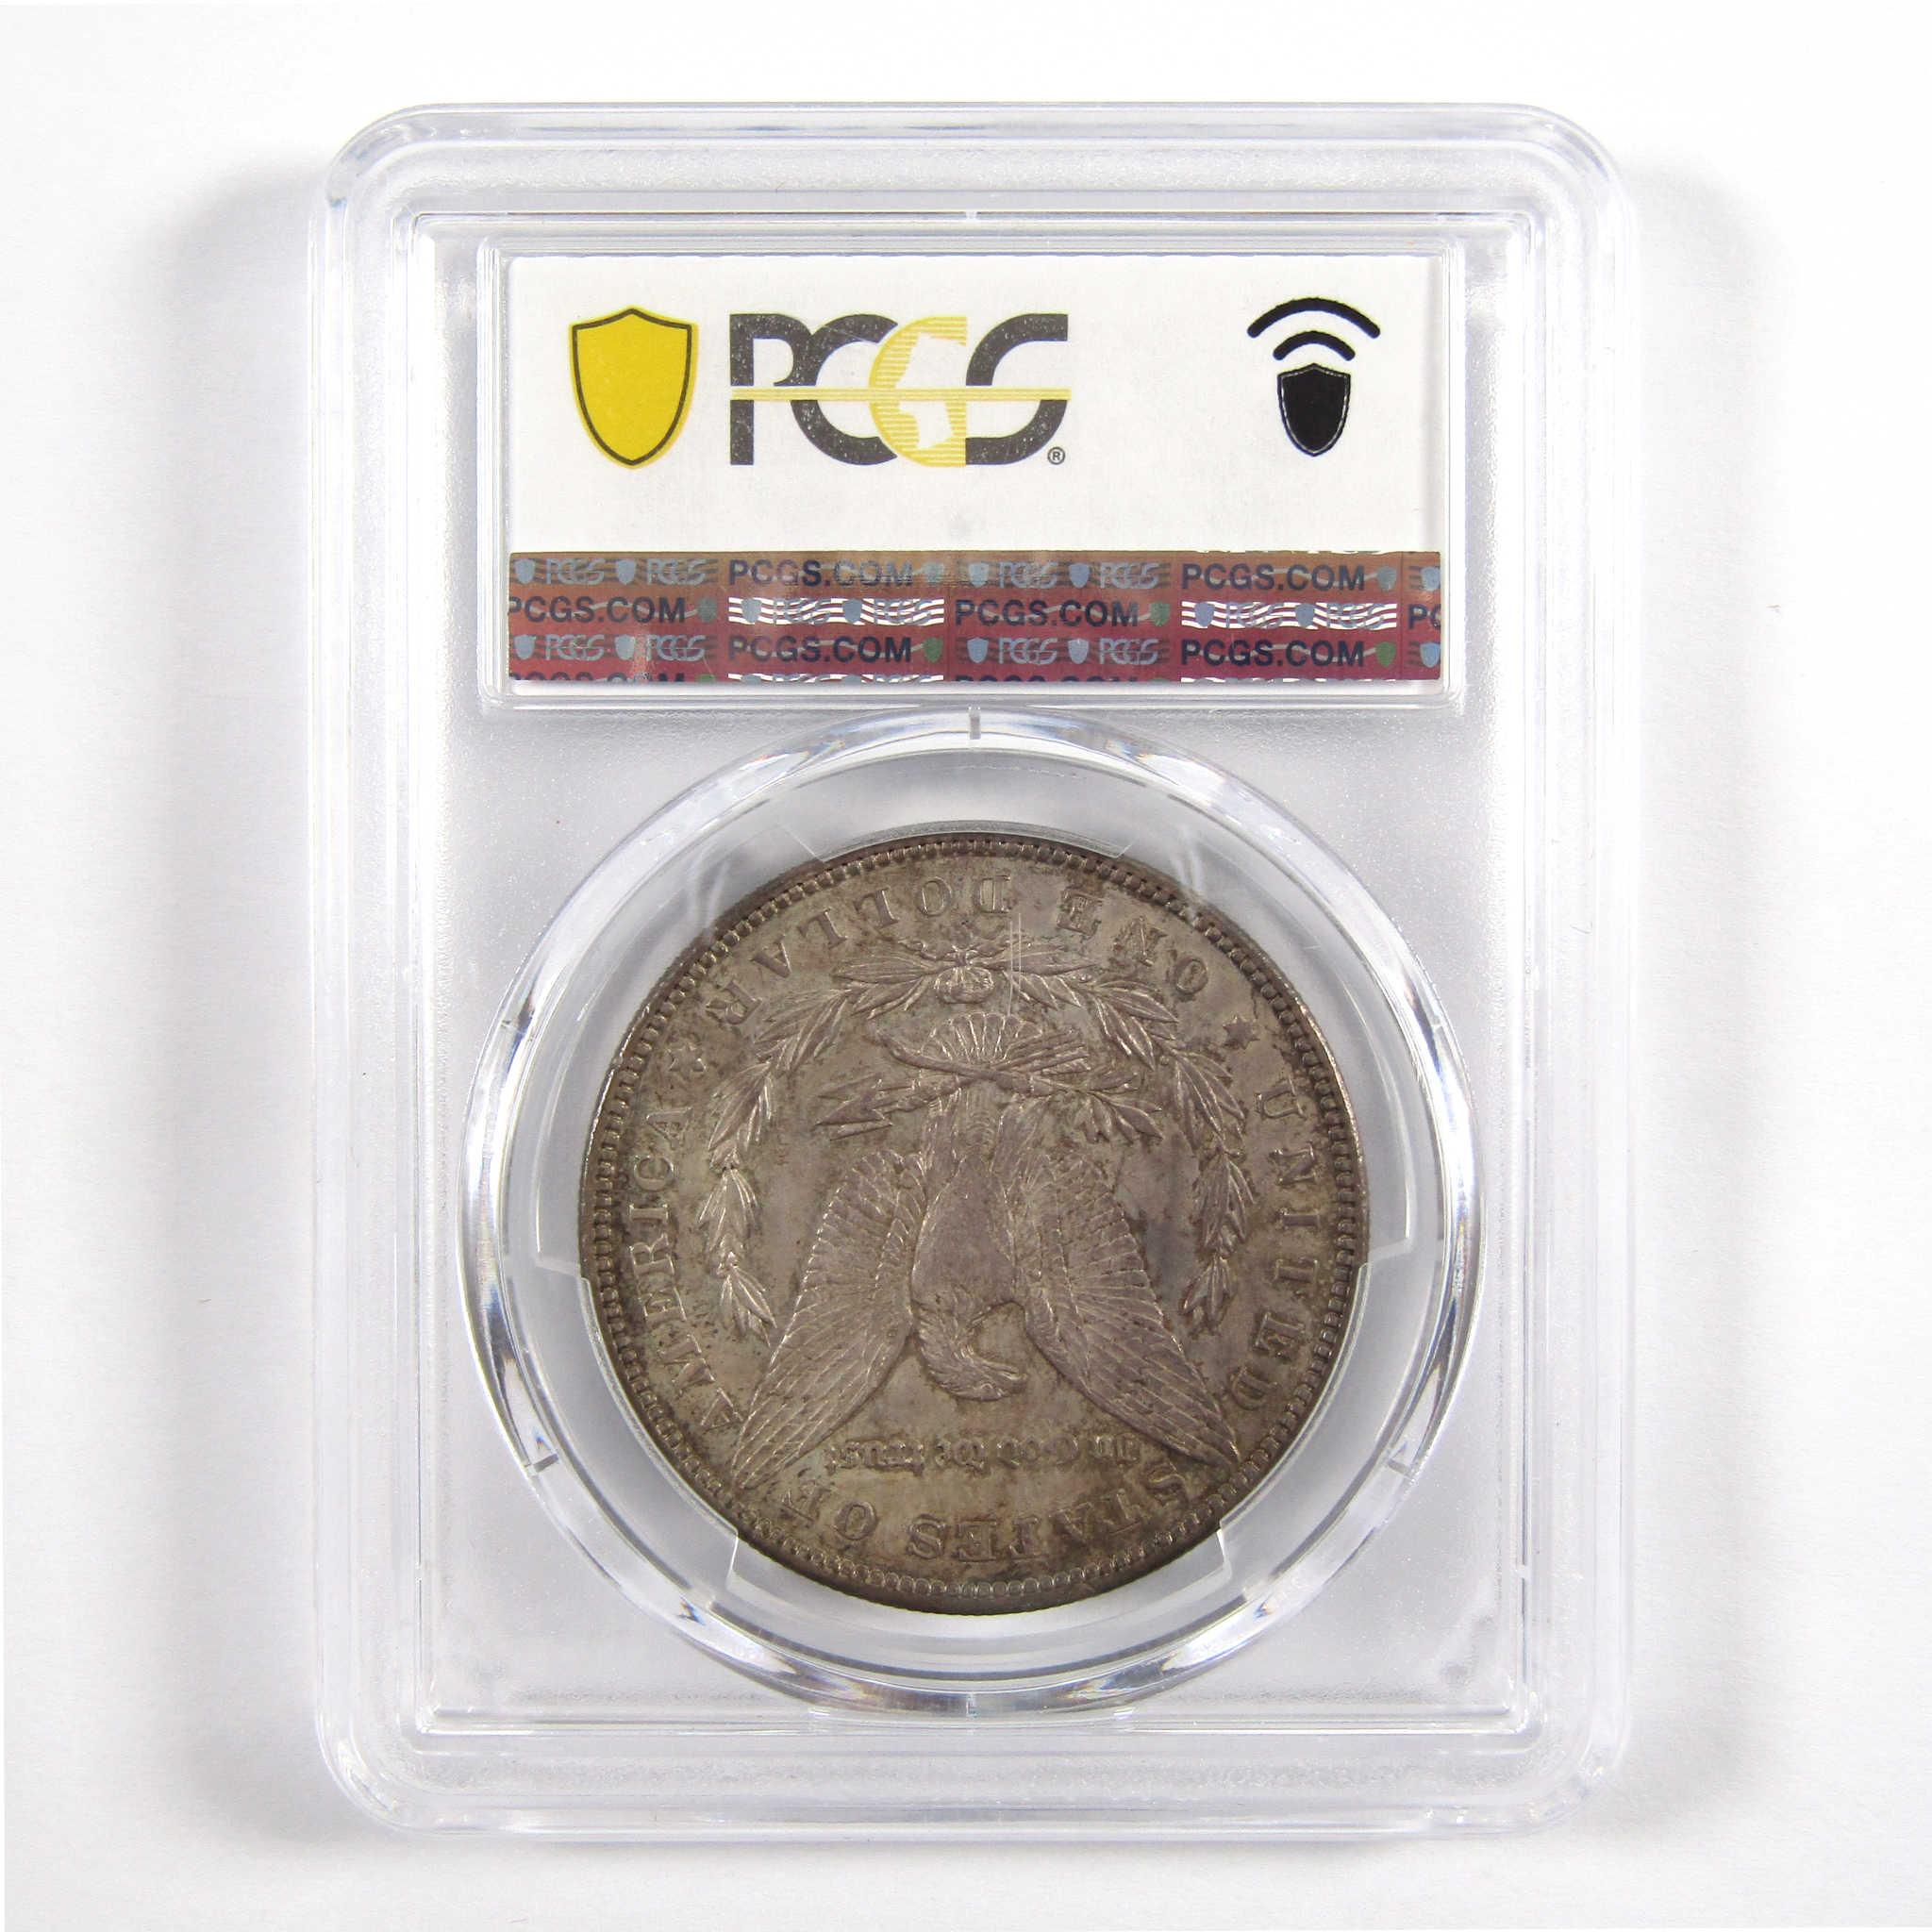 1895 S Morgan Dollar AU 50 PCGS 90% Silver $1 Coin SKU:I6274 - Morgan coin - Morgan silver dollar - Morgan silver dollar for sale - Profile Coins &amp; Collectibles